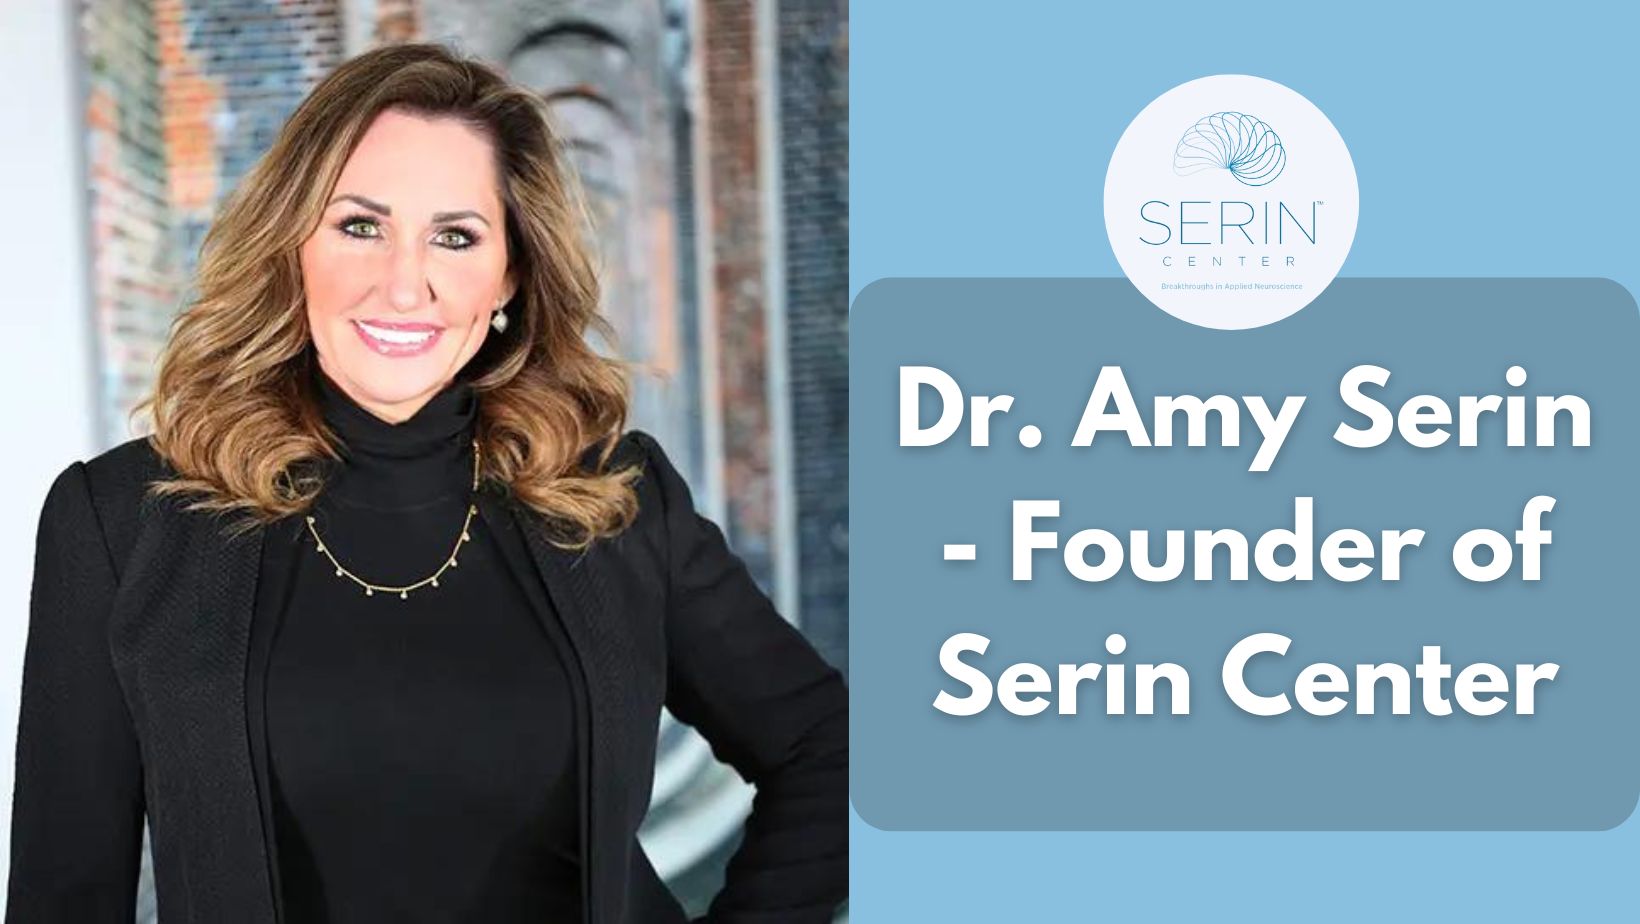 Dr. Amy Serin, founder of Serin Center.